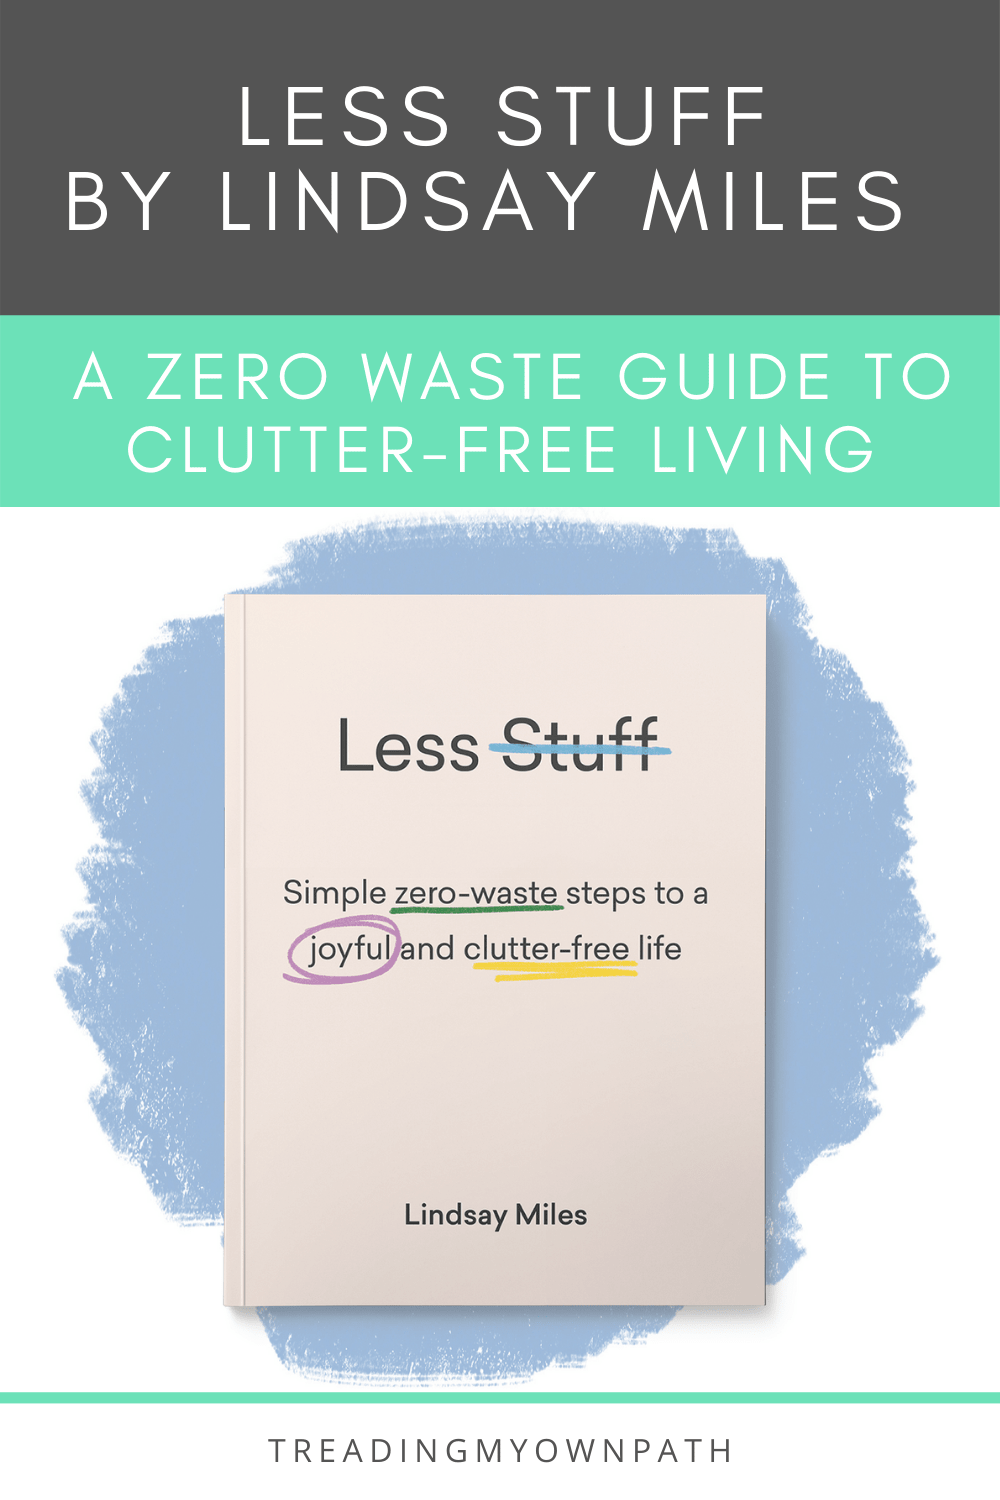 Introducing Less Stuff: A book about changing our relationship with our things, with a zero waste perspective